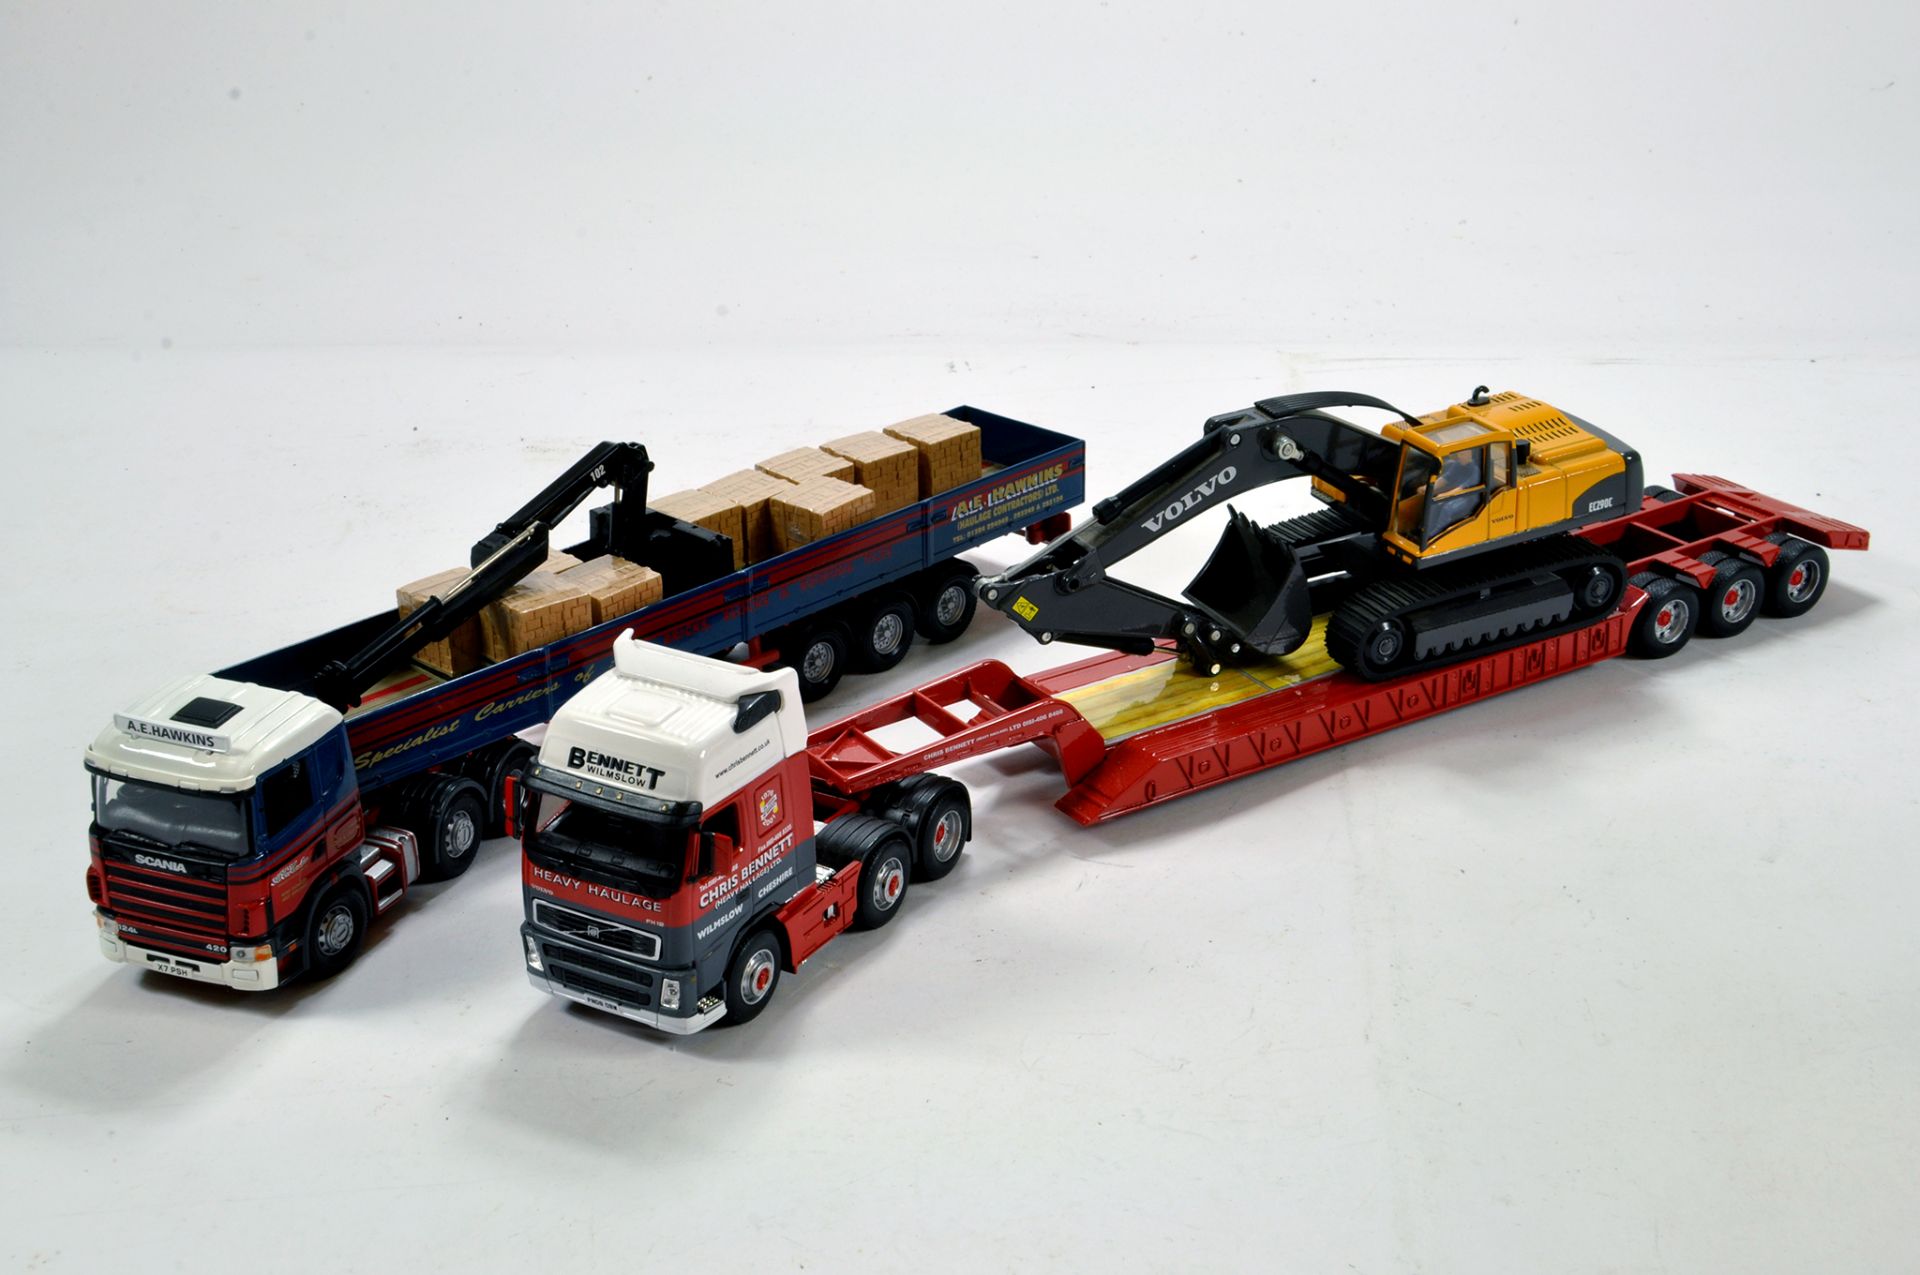 Diecast 1/50 Truck and Trailer Combinations including Low Loader and Excavator Load plus one